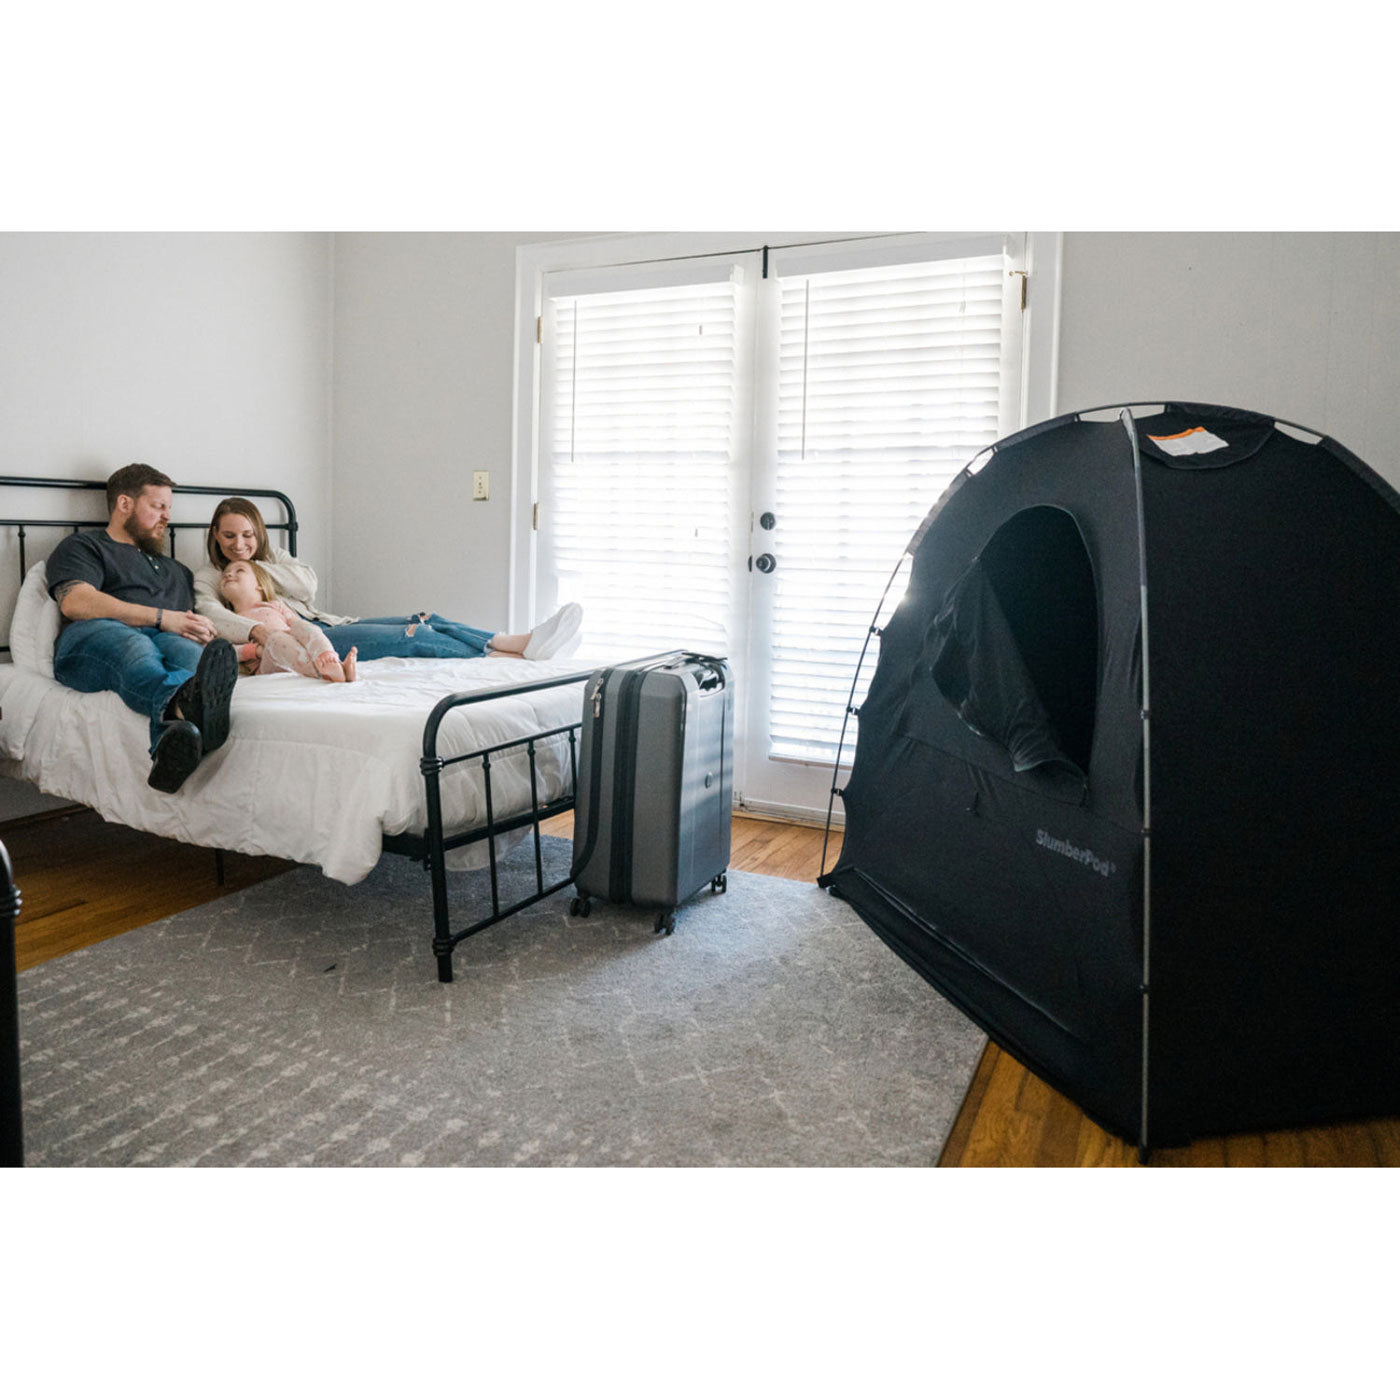 Family on bed with SlumberPod Privacy Pod - 3.0 in room